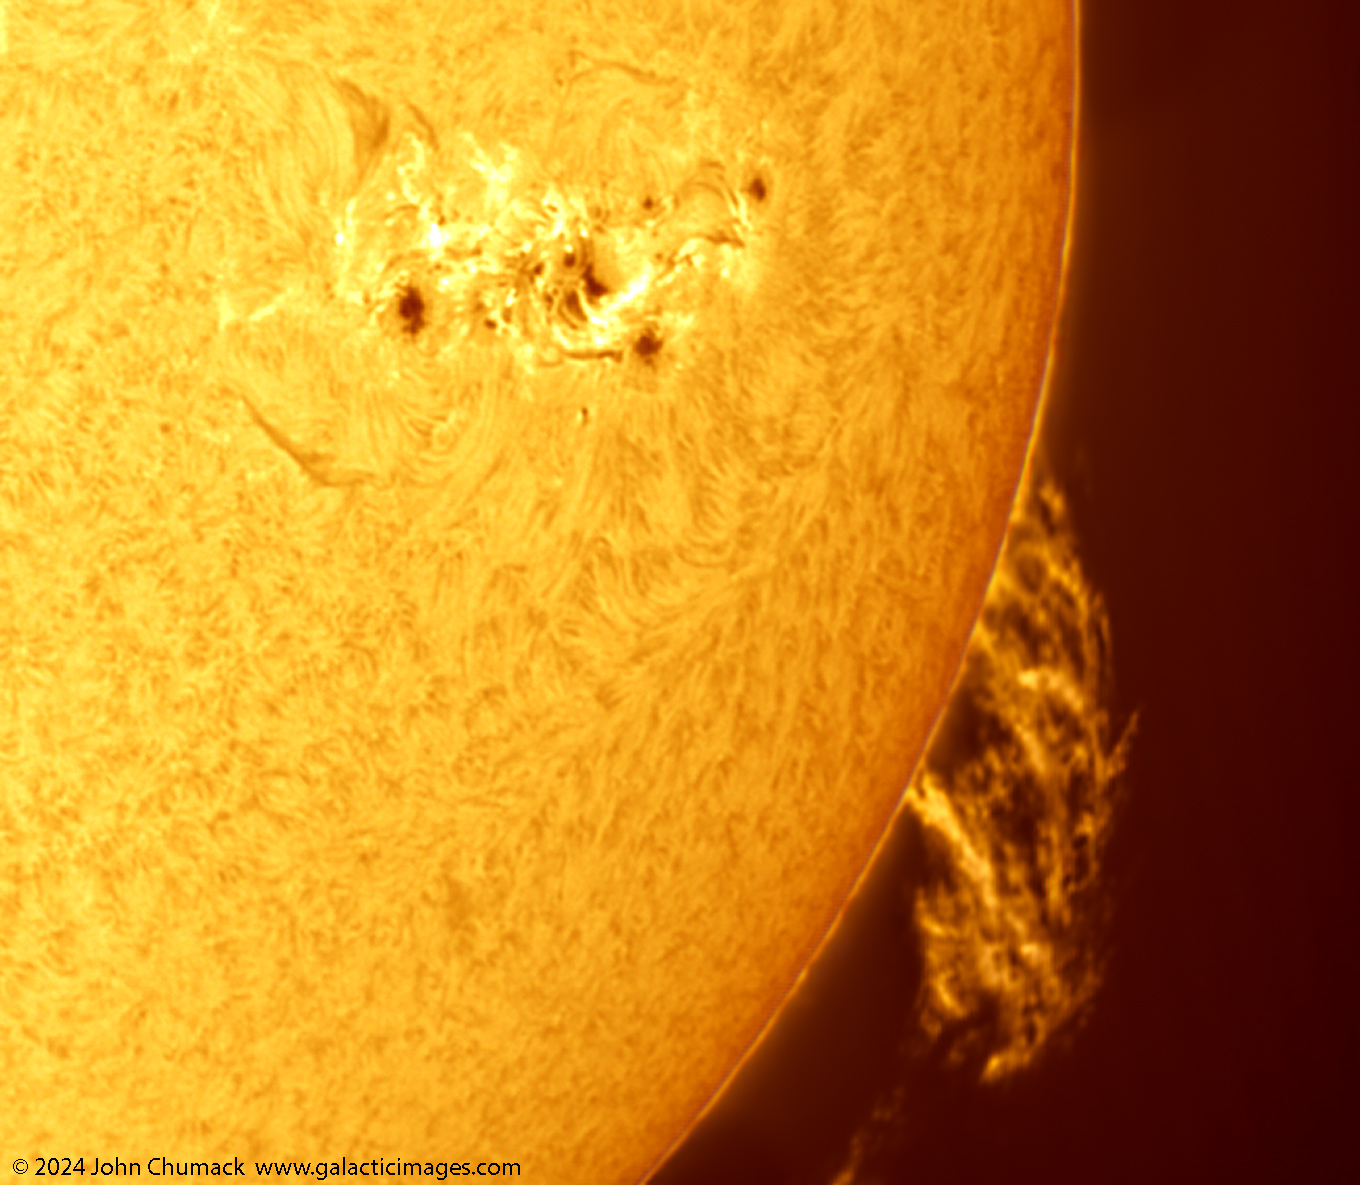 Massive Sunspot and Active Region #3664 with Large Prominences on the South Western edge of the Sun